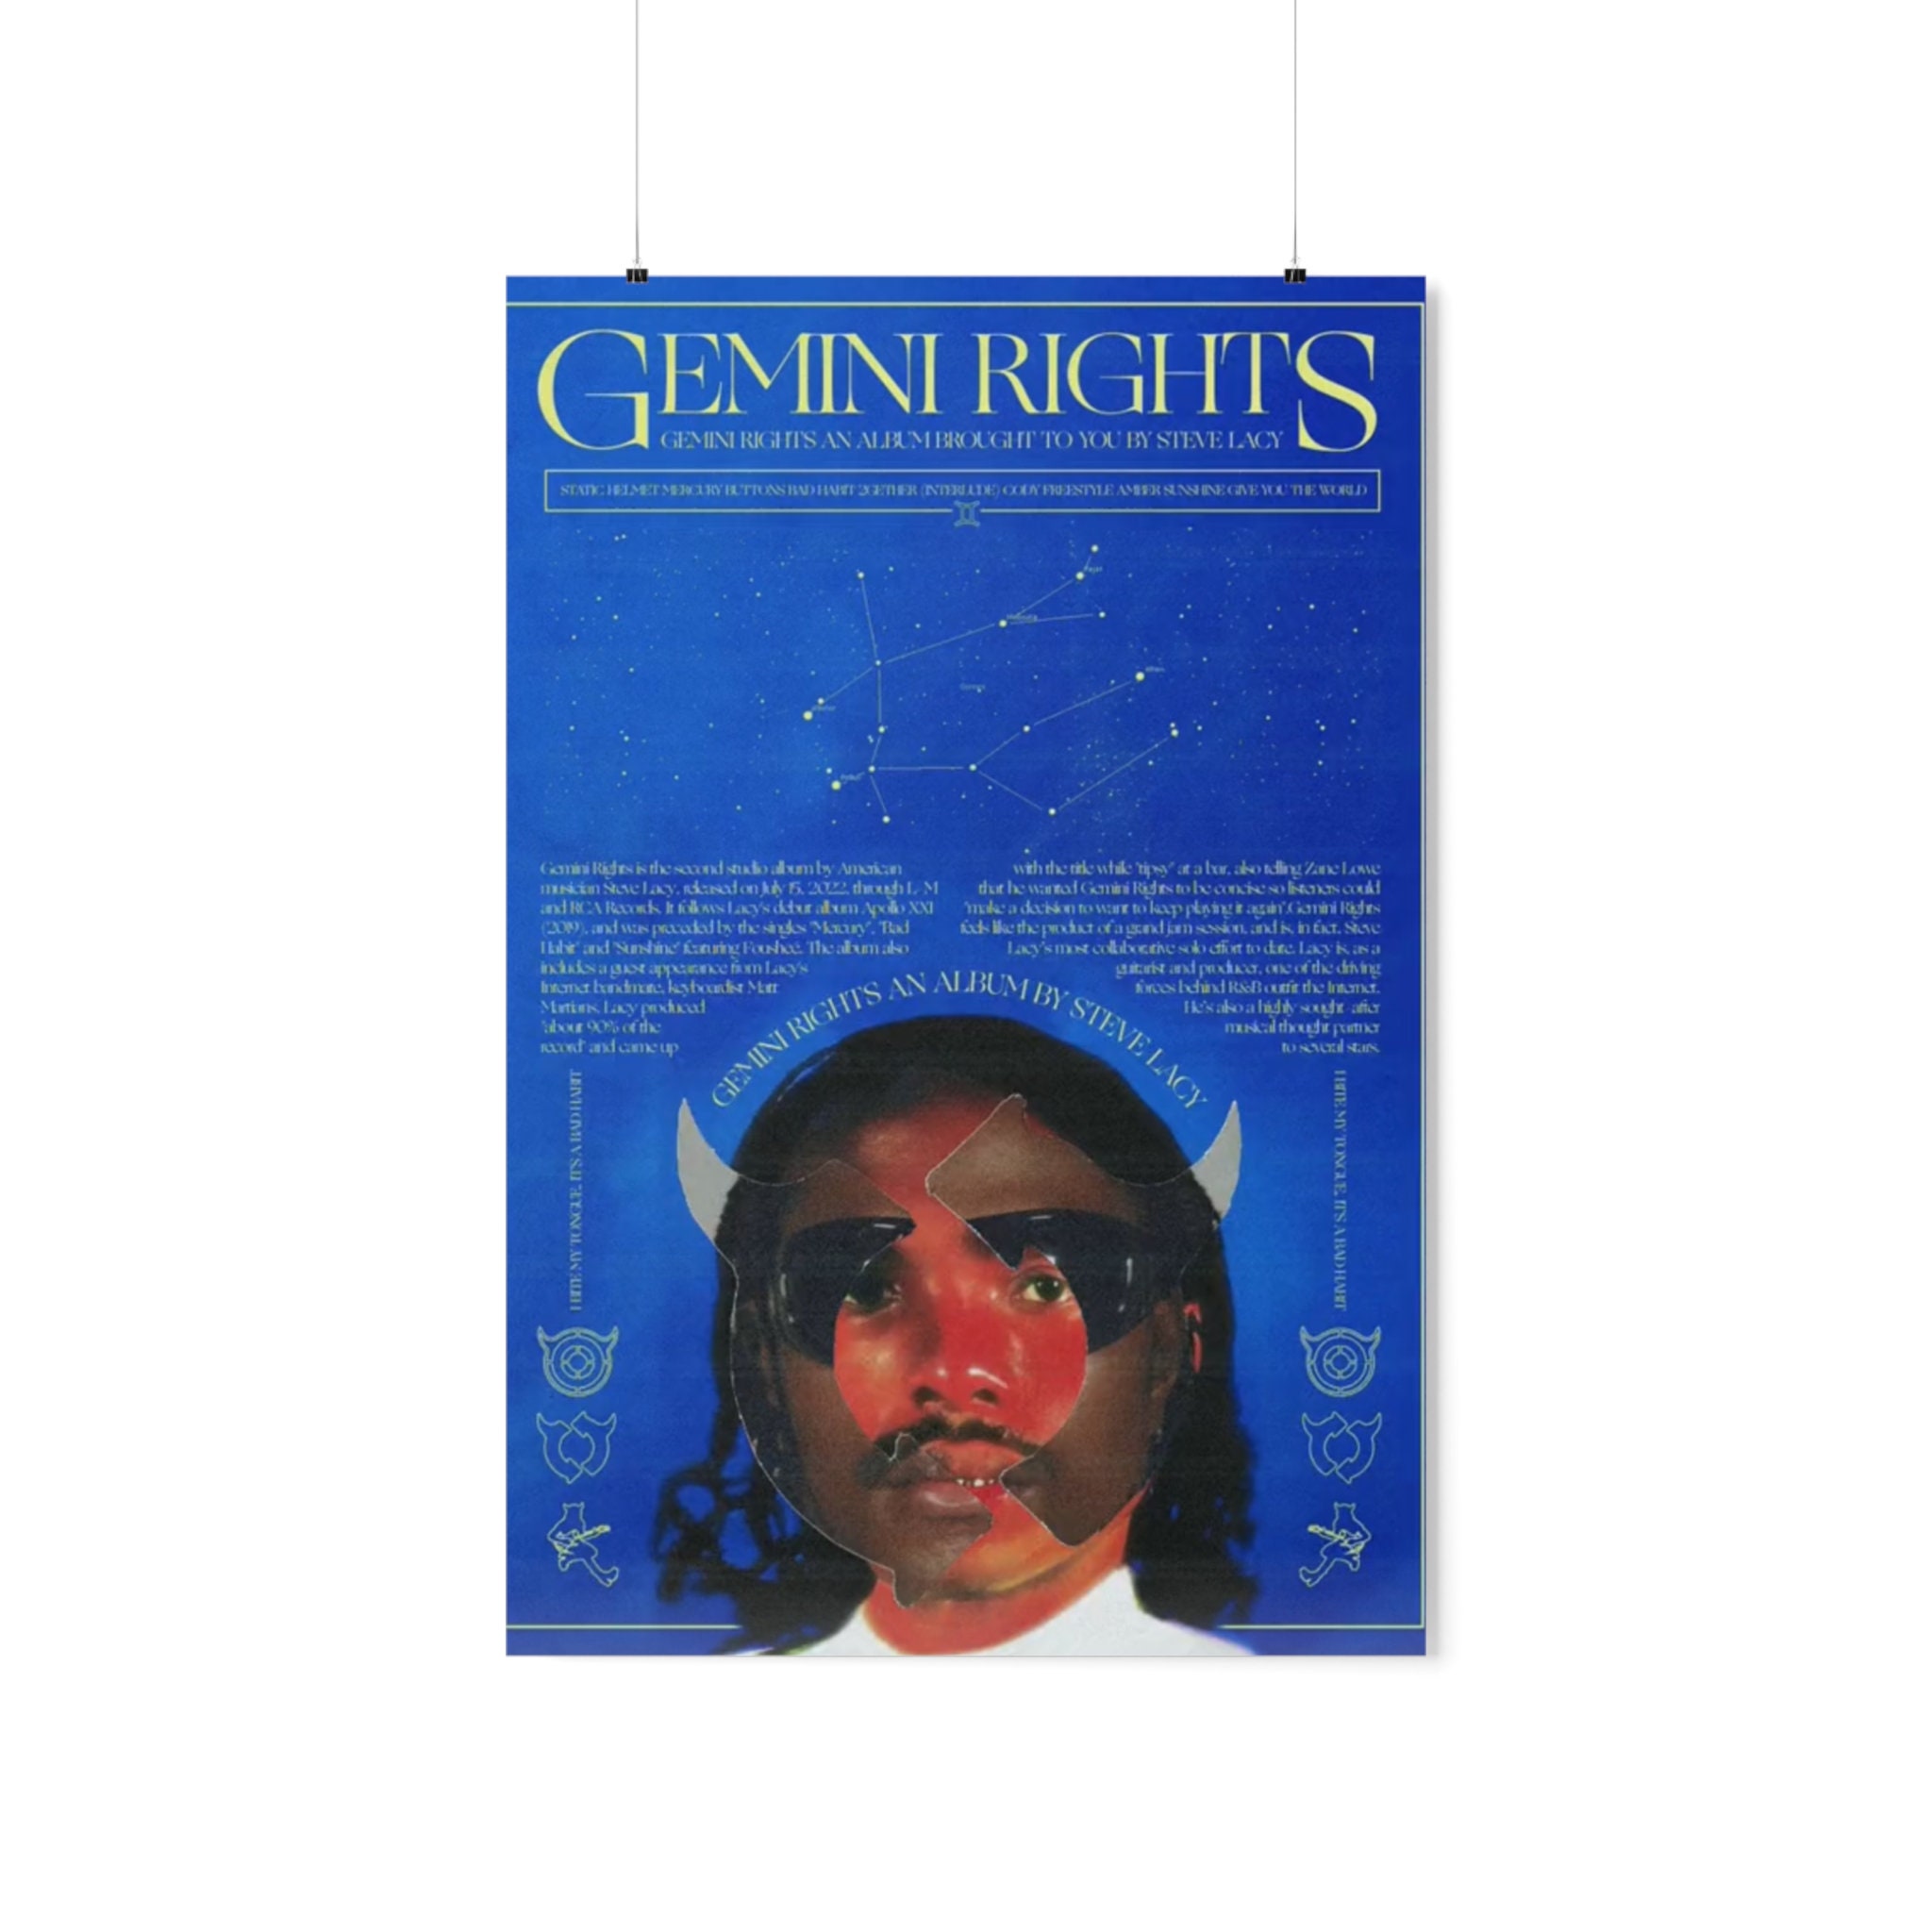 Steve Lacy Gemini Rights Poster Printed on the Retro Vinyl Record